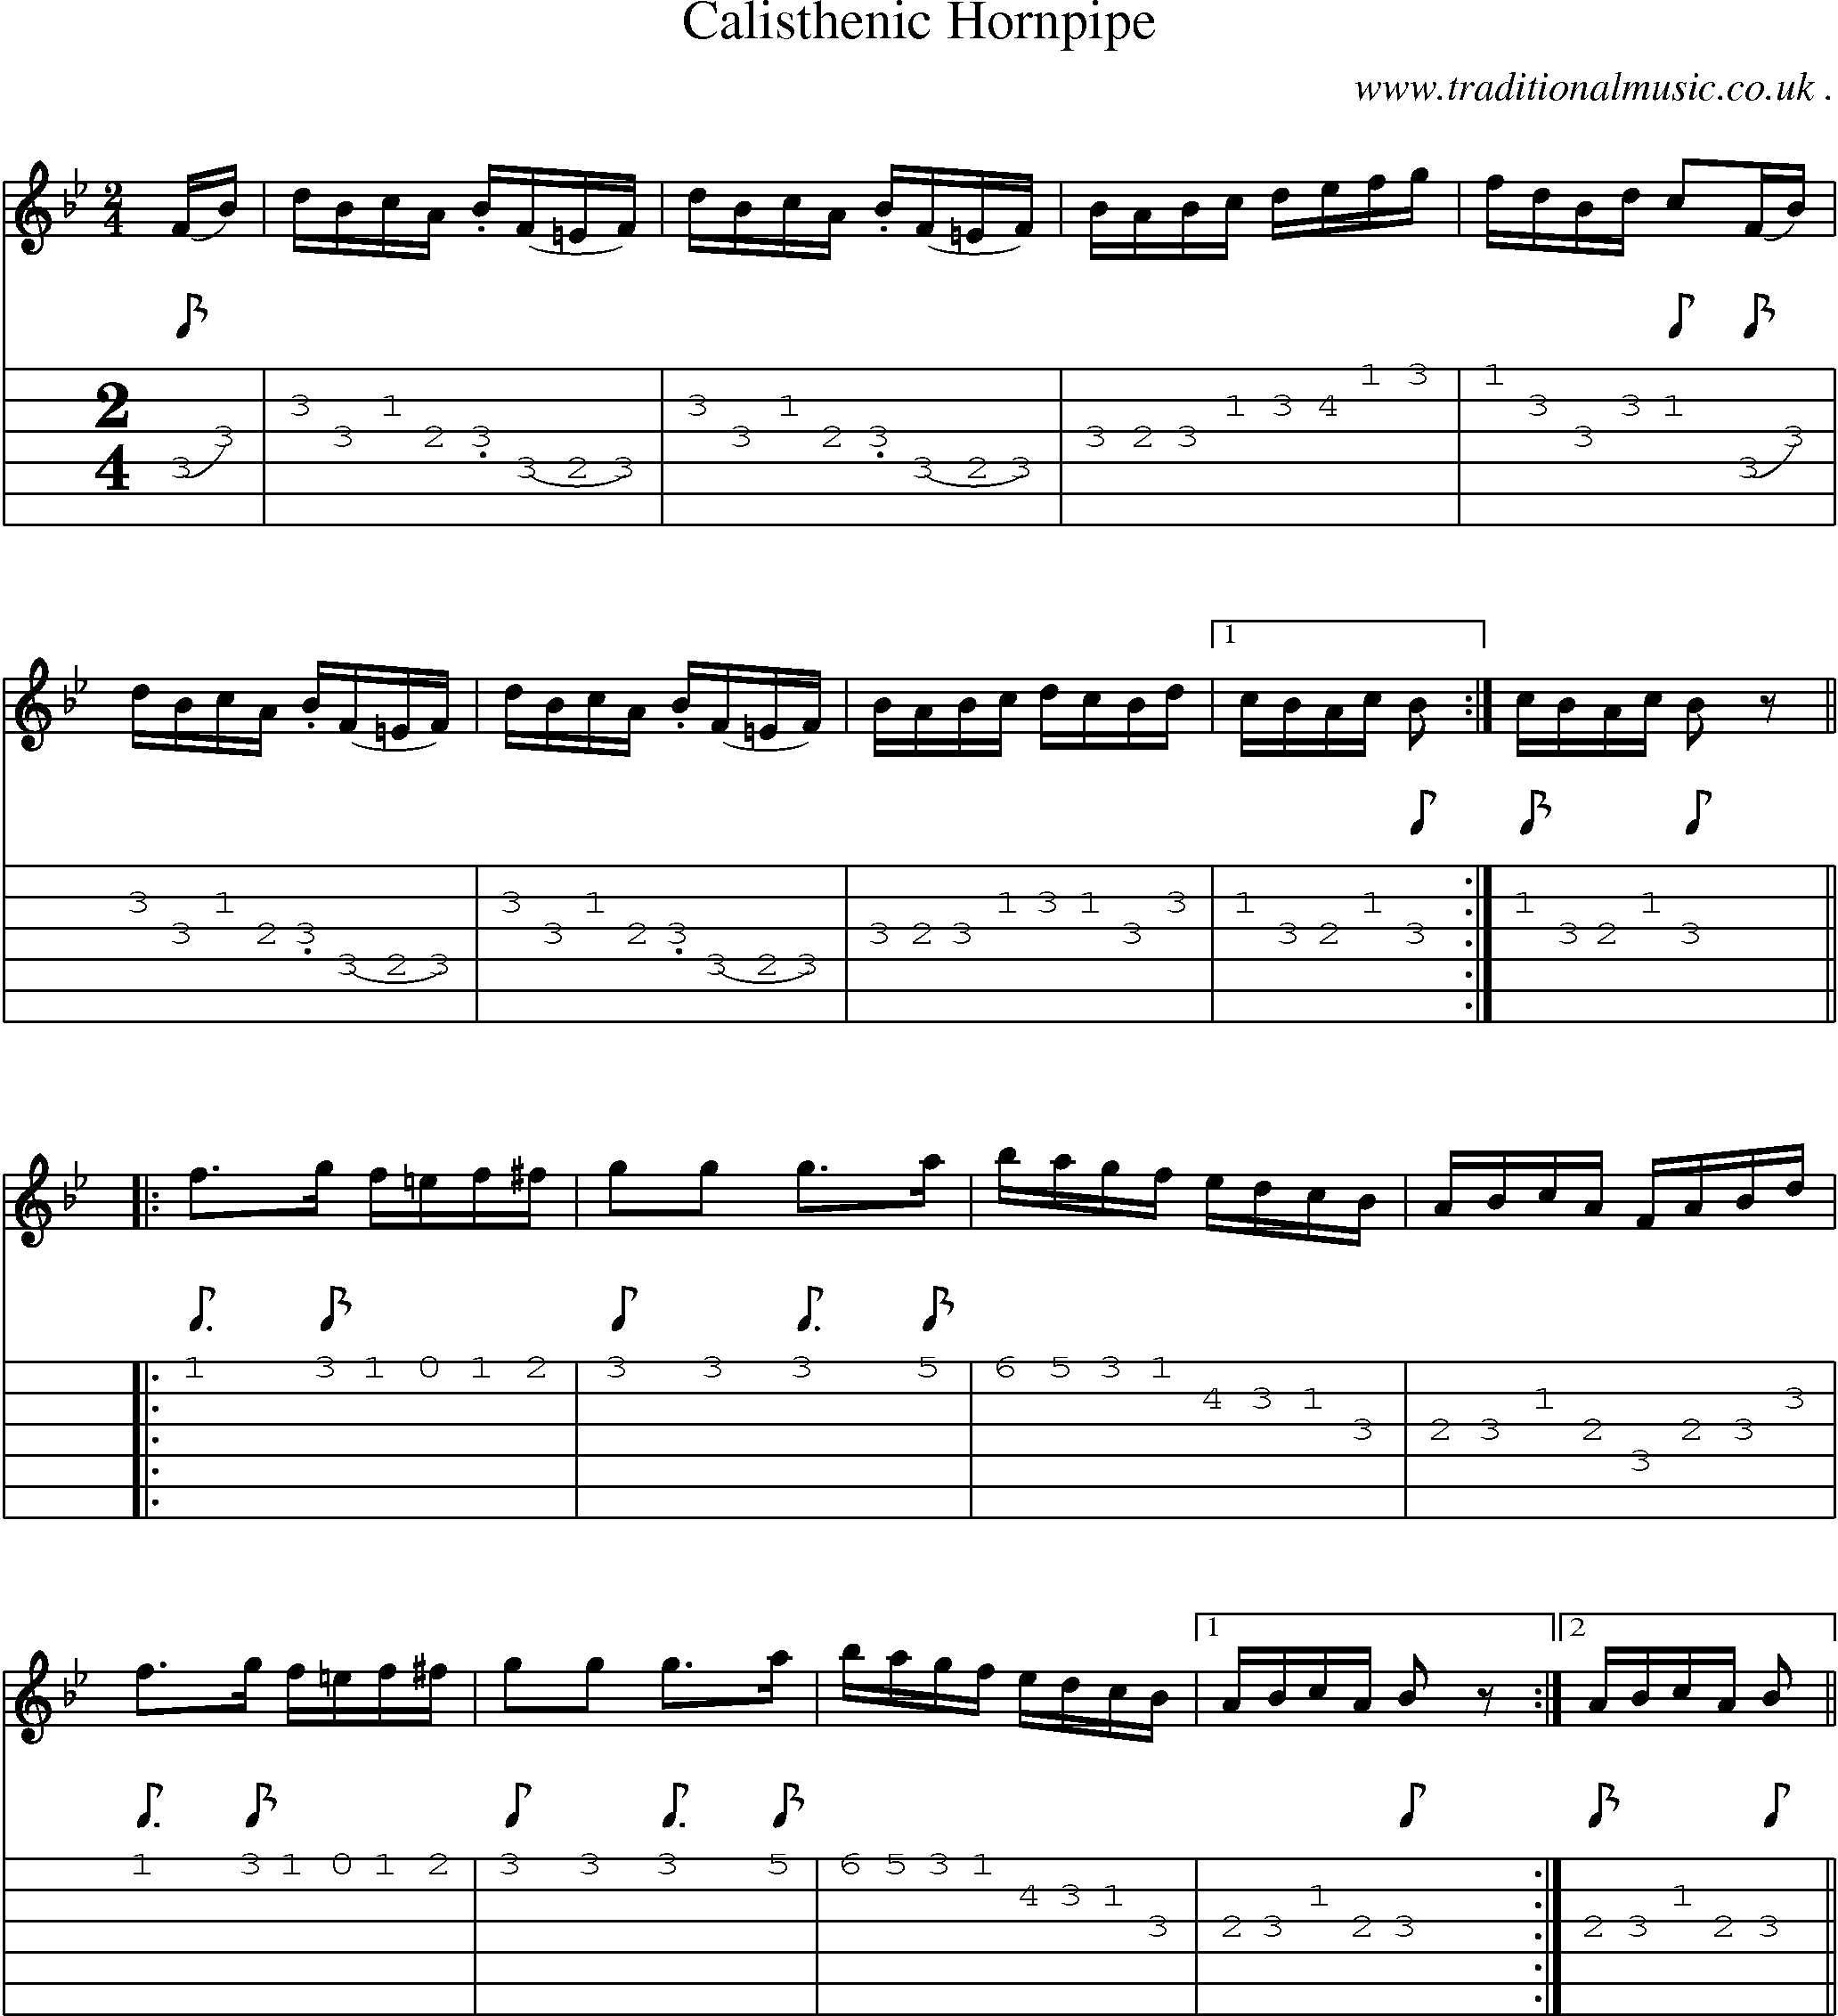 Sheet-Music and Guitar Tabs for Calisthenic Hornpipe